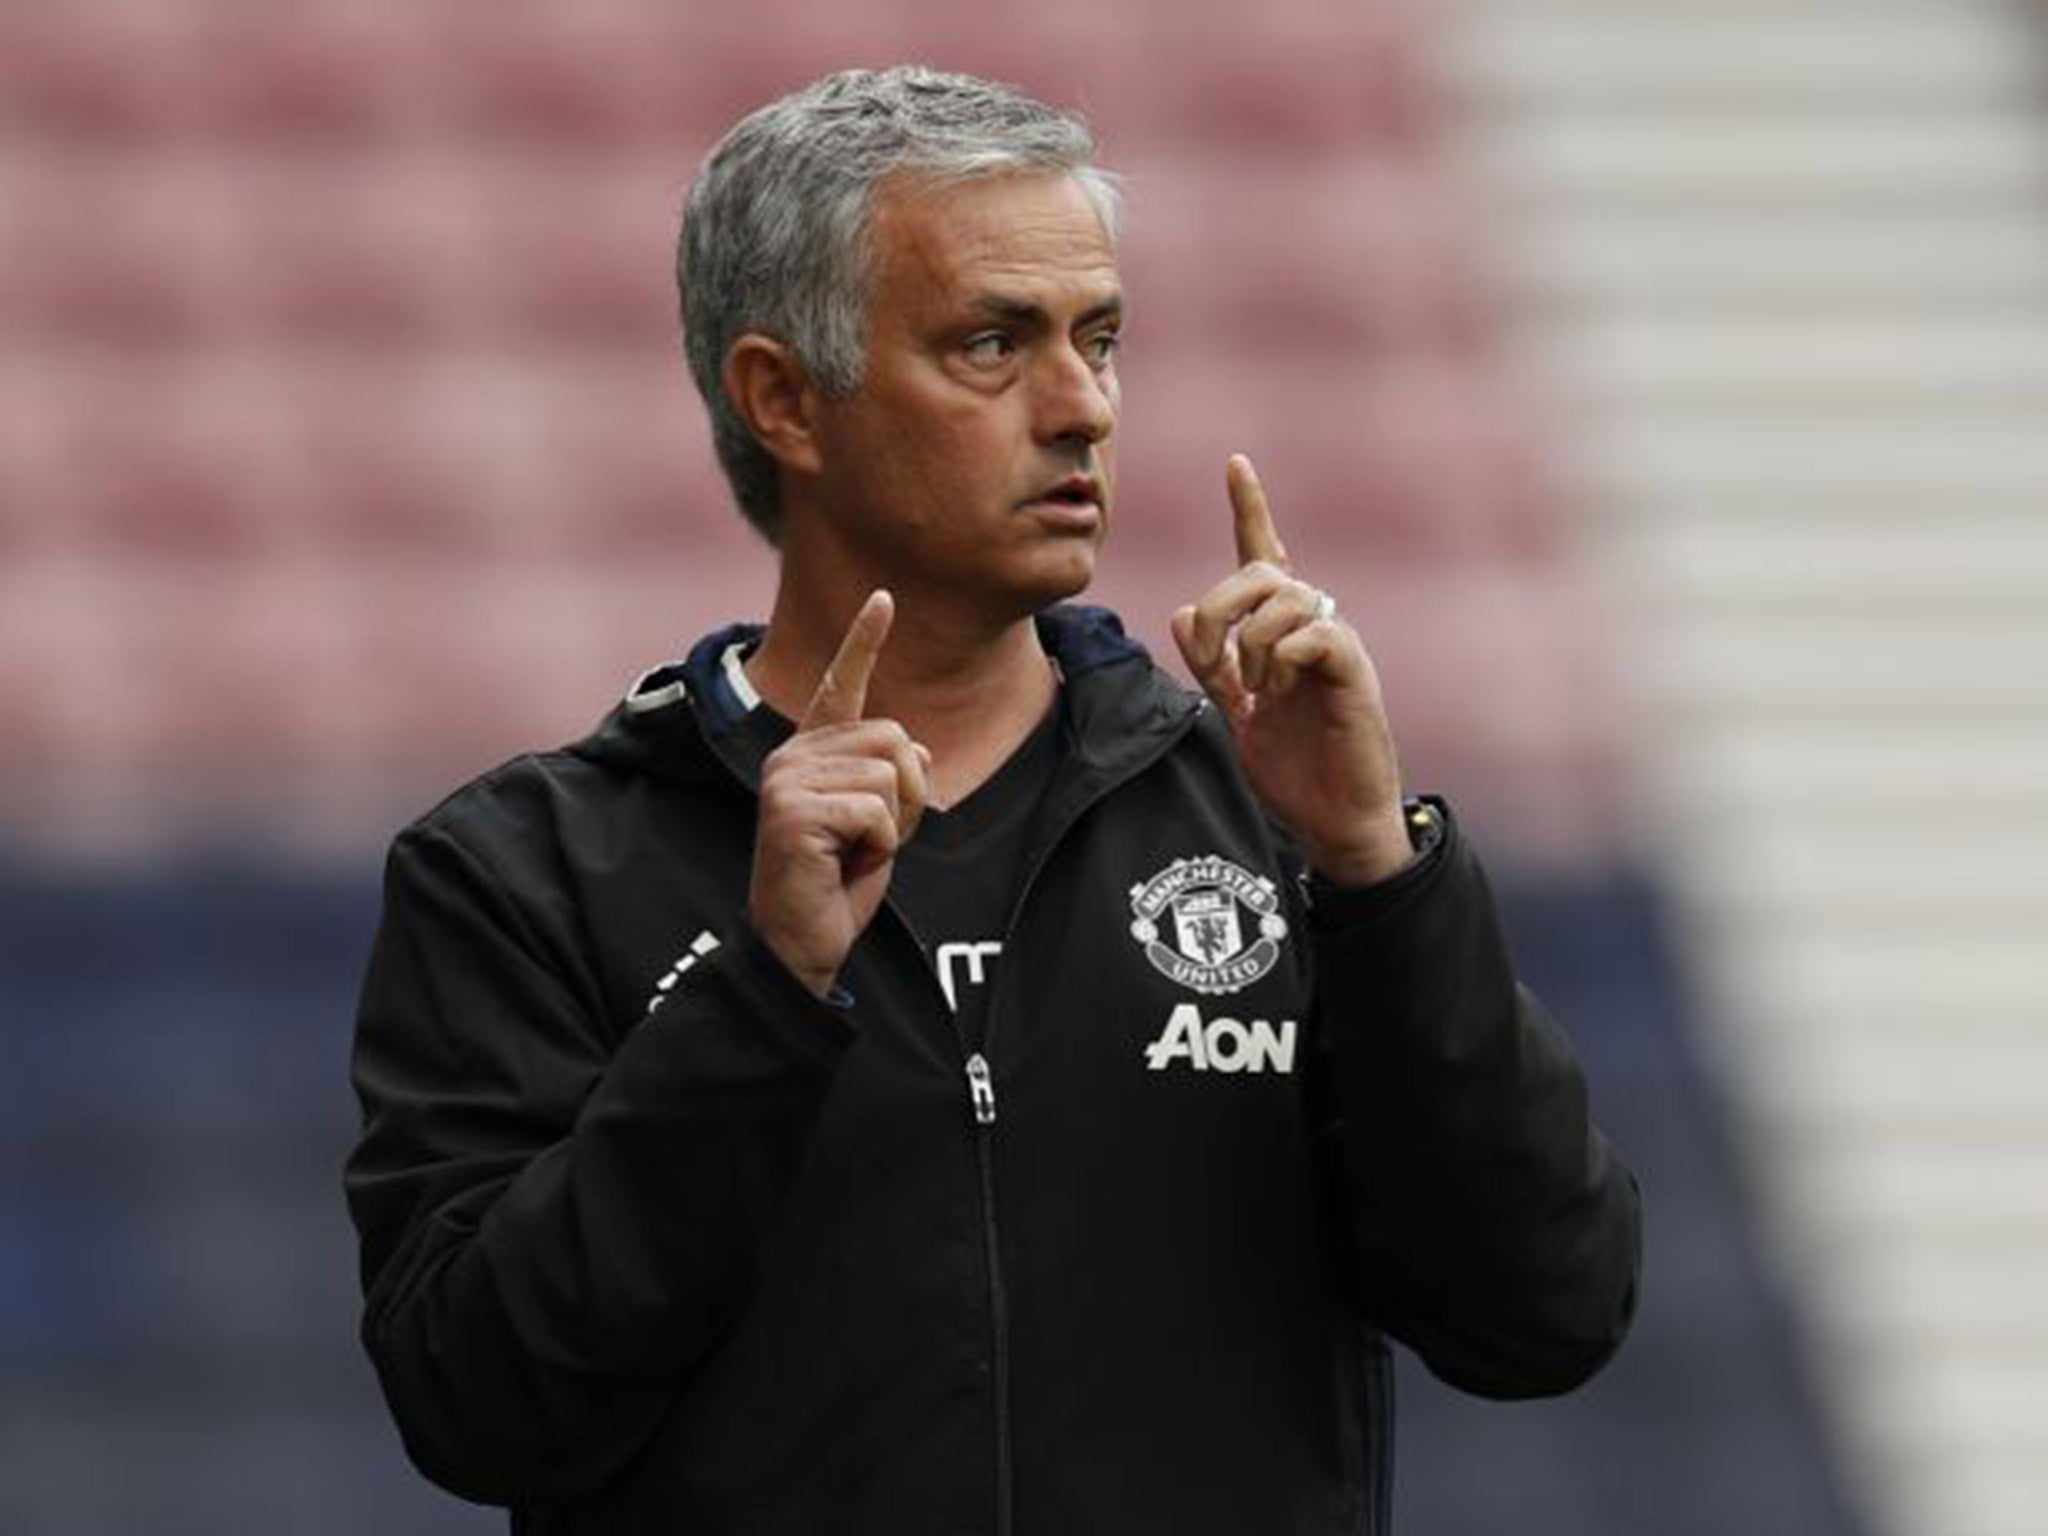 Jose Mourinho gives out instructions during Manchester United's pre-season friendly against Wigan